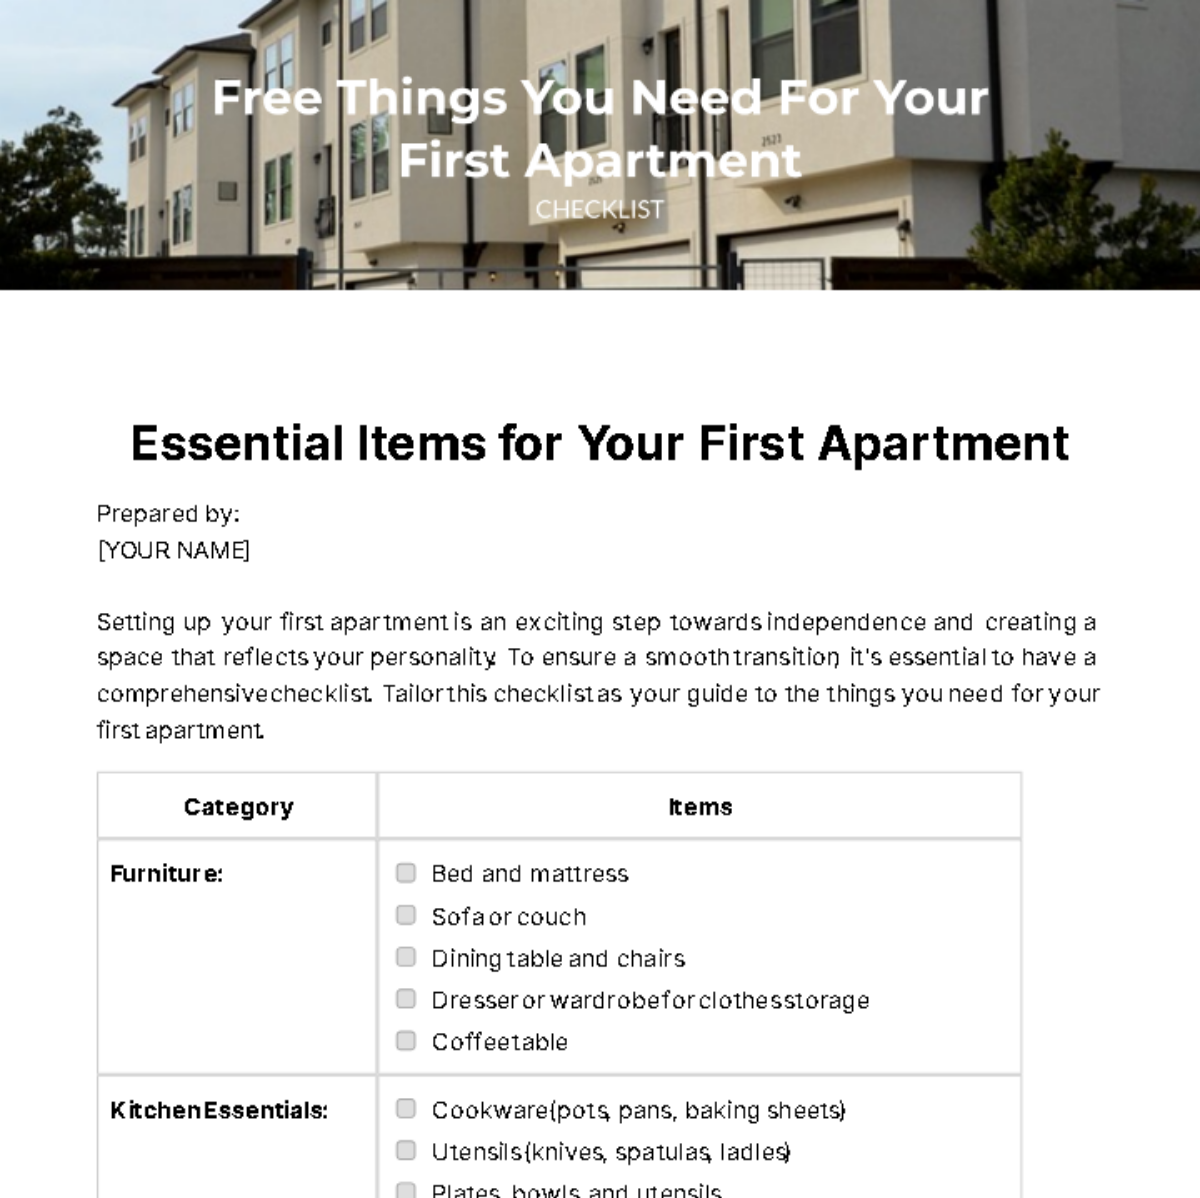 Free Things You Need For Your First Apartment Checklist Template